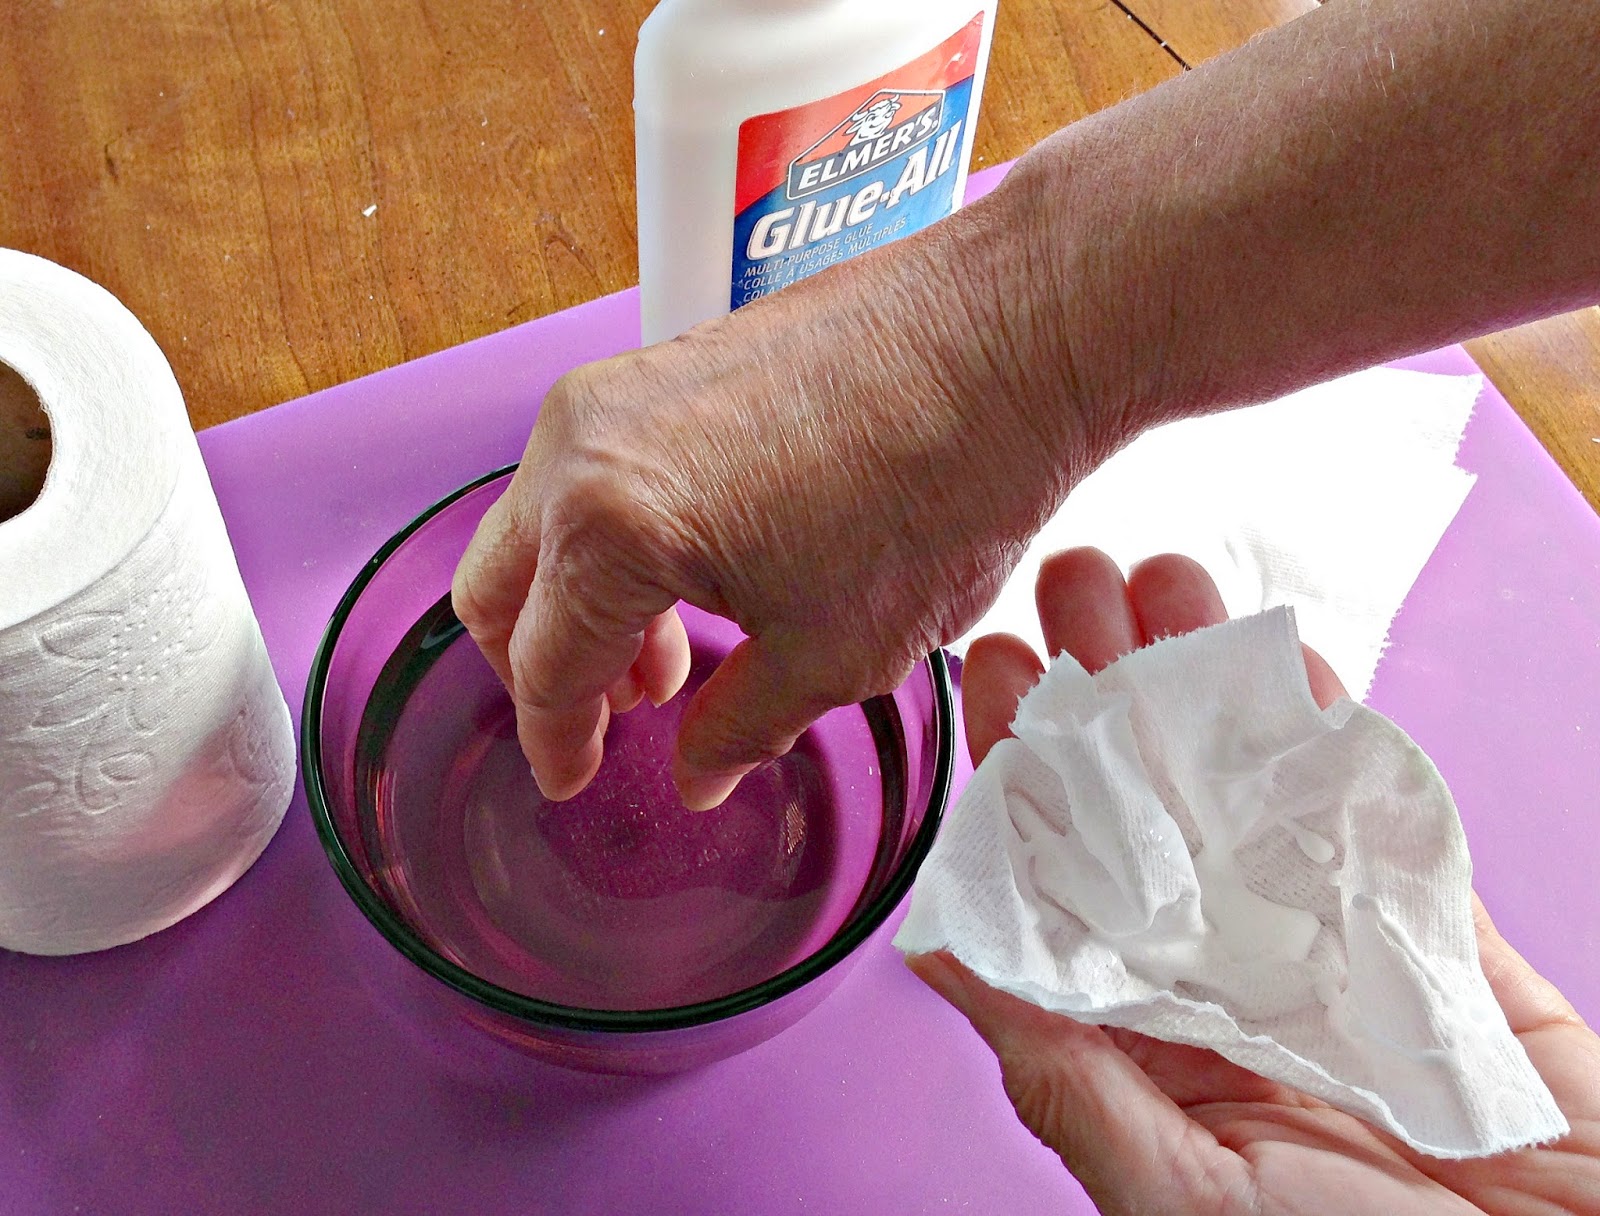 Design Your Own Tissue Paper Sheets